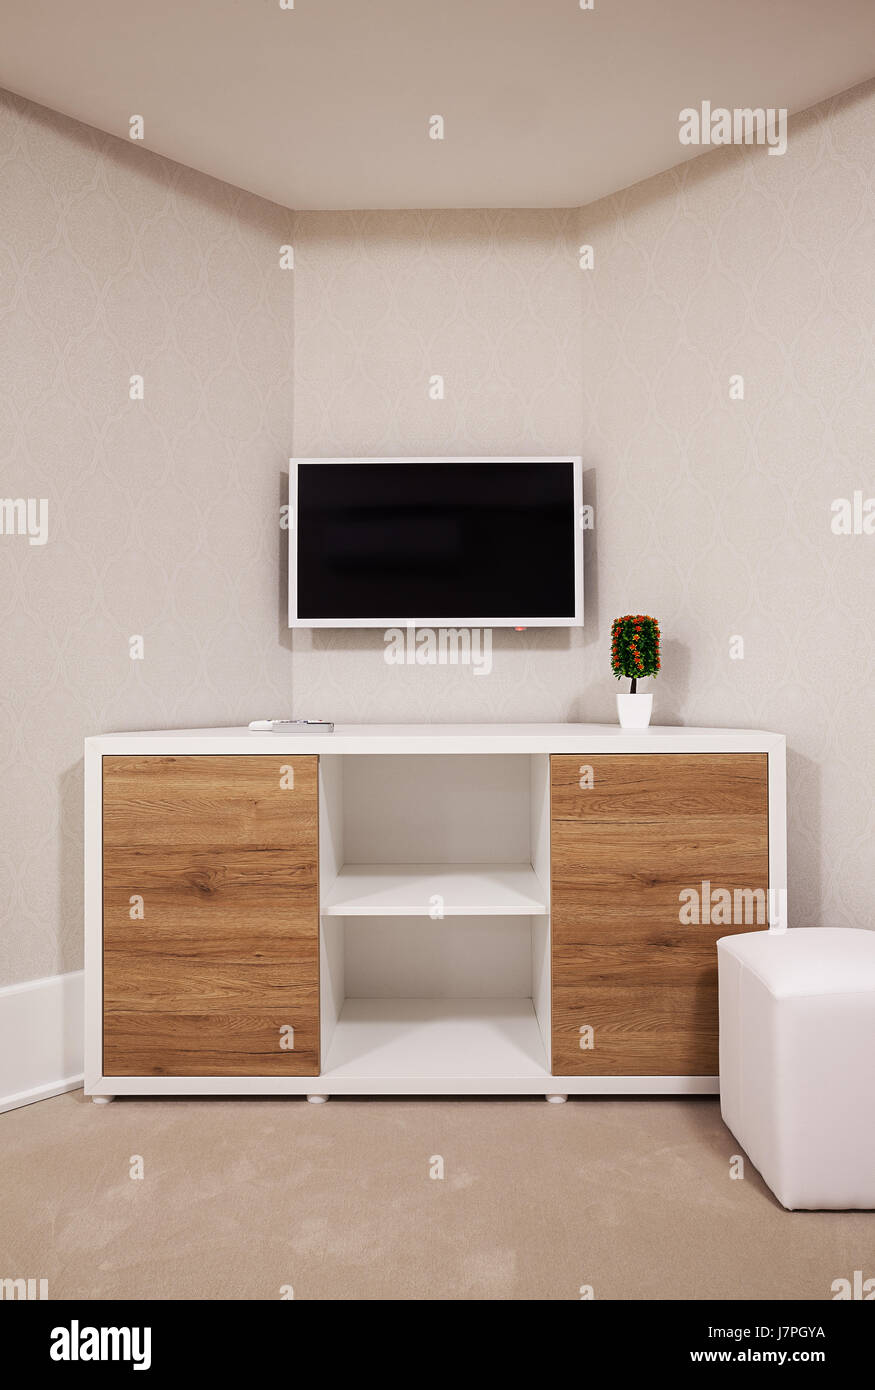 One modern LCD on wall with wooden closet in front, one corner of a room  Stock Photo - Alamy